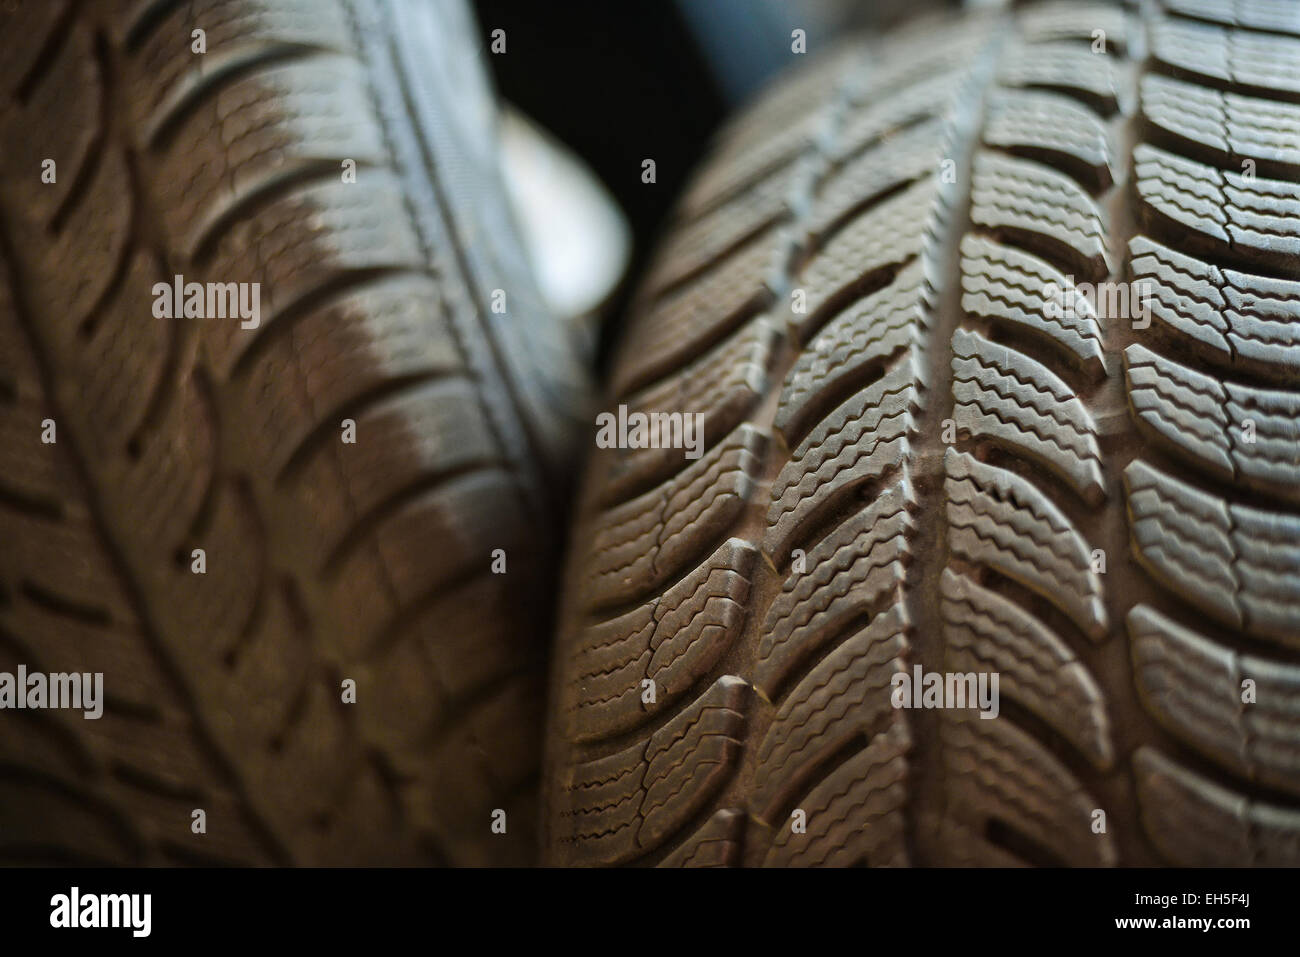 Used car tires in a warehouse in natural light Stock Photo